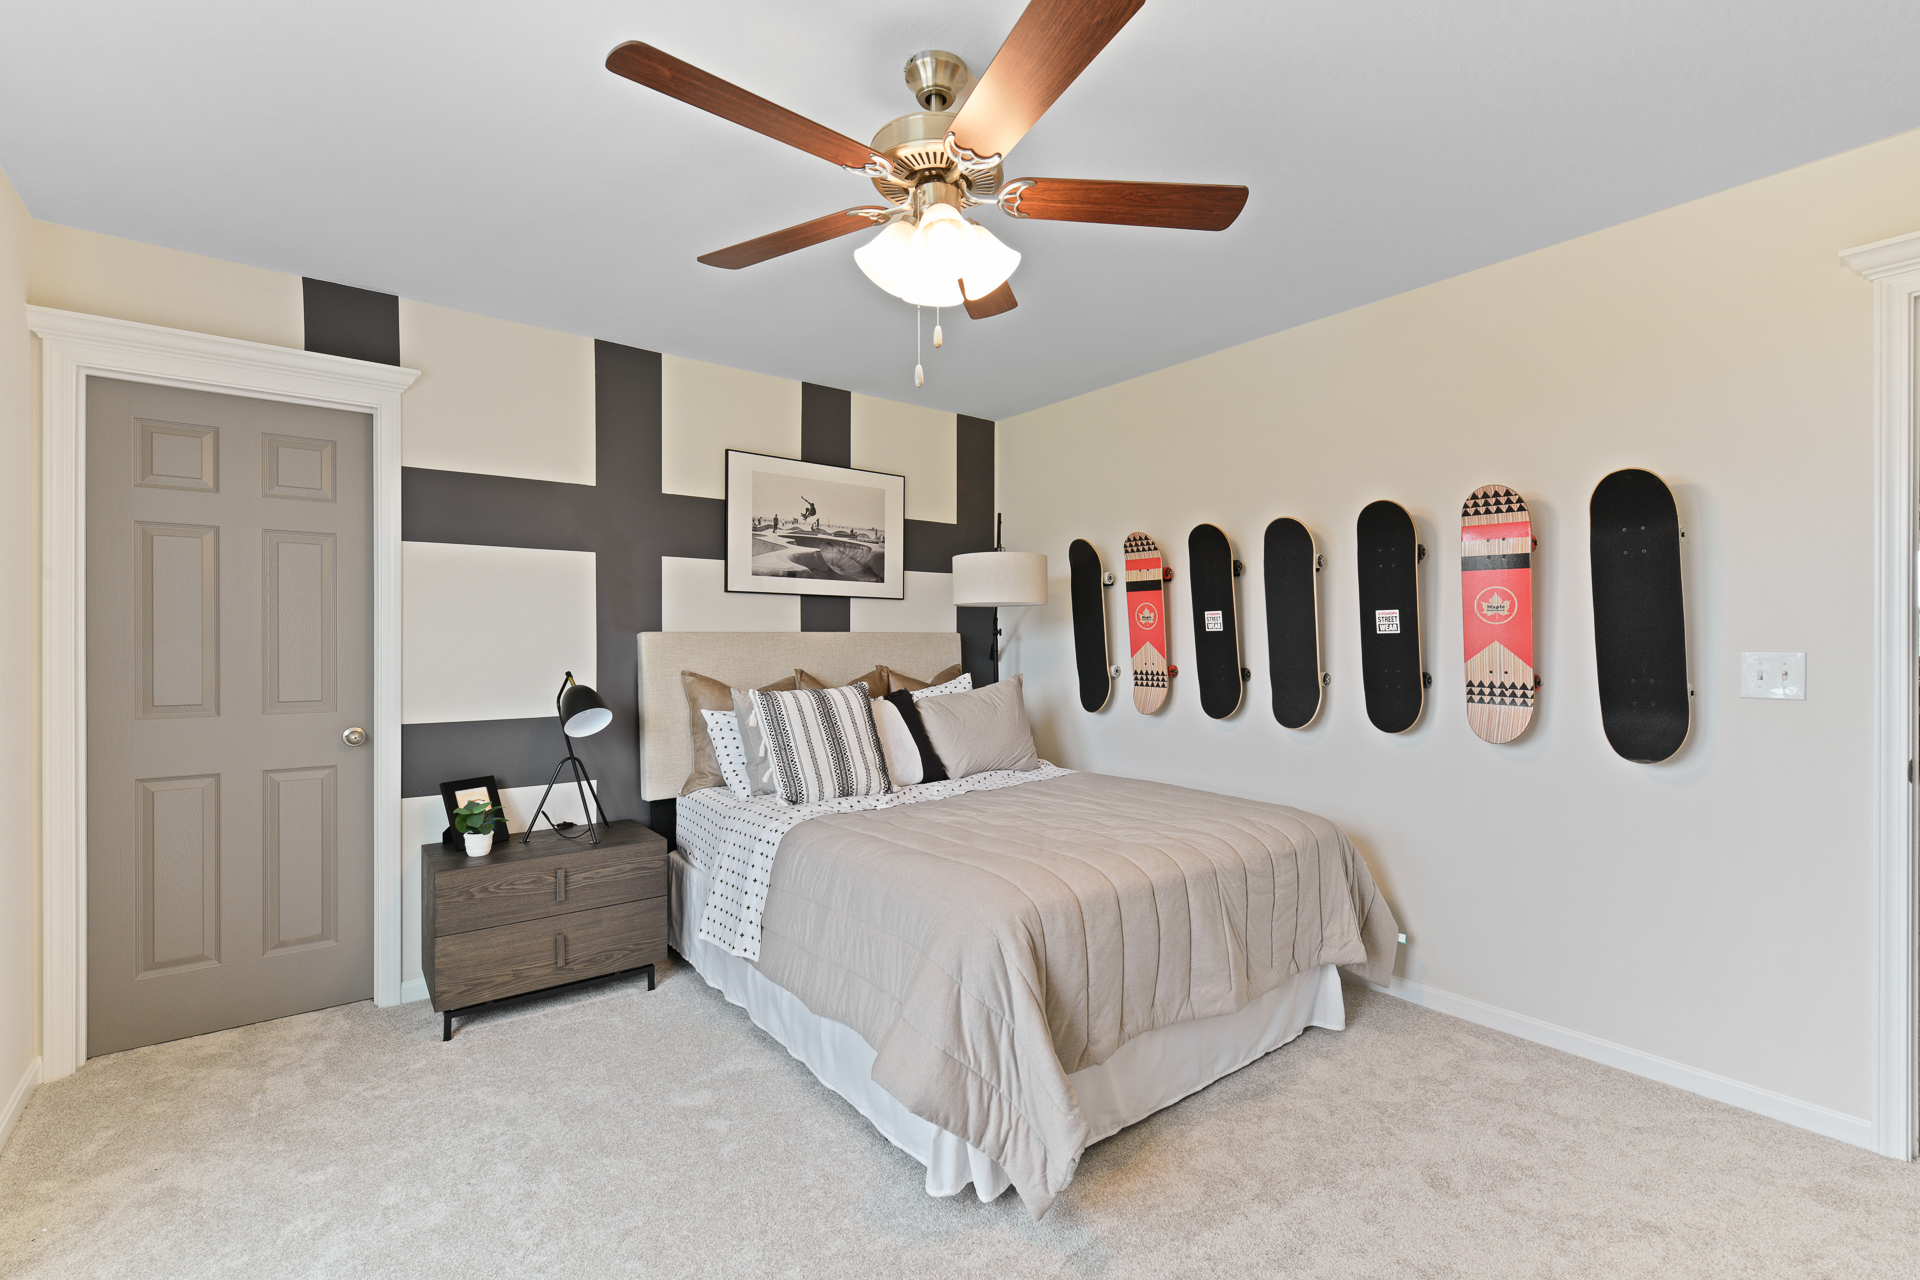 Third bedroom of a new home for sale in Butler County, Ohio